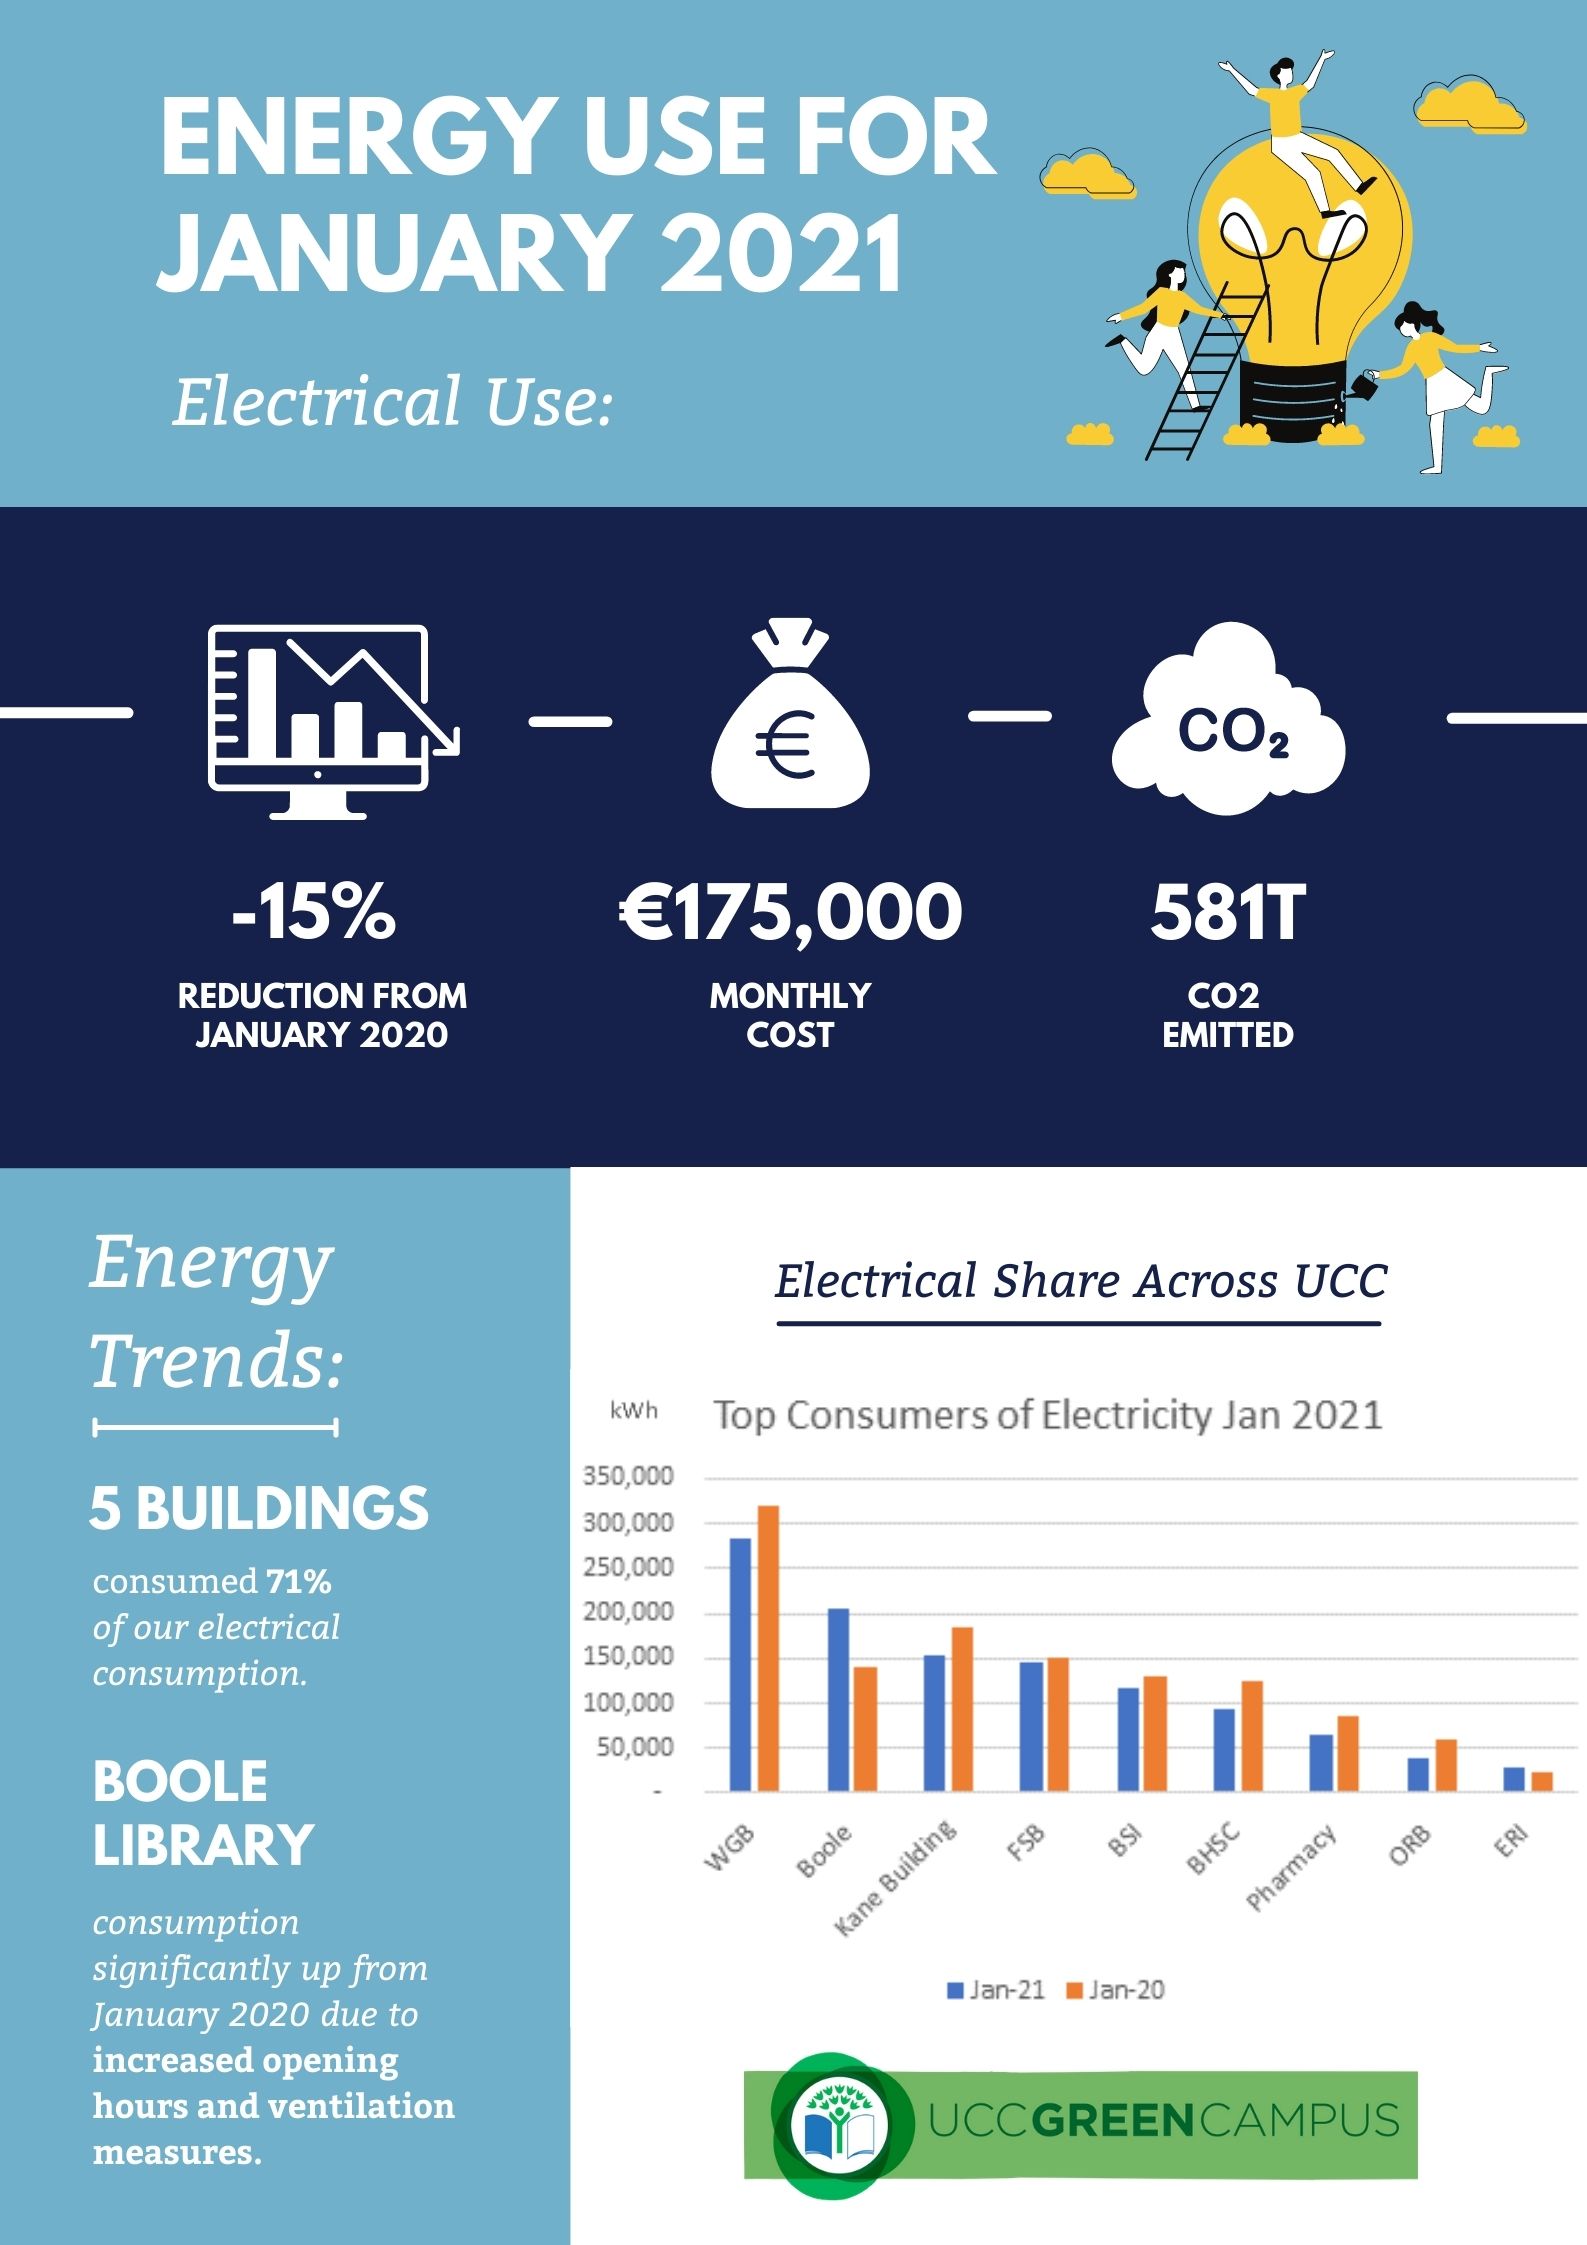 Energy Use for January 2021